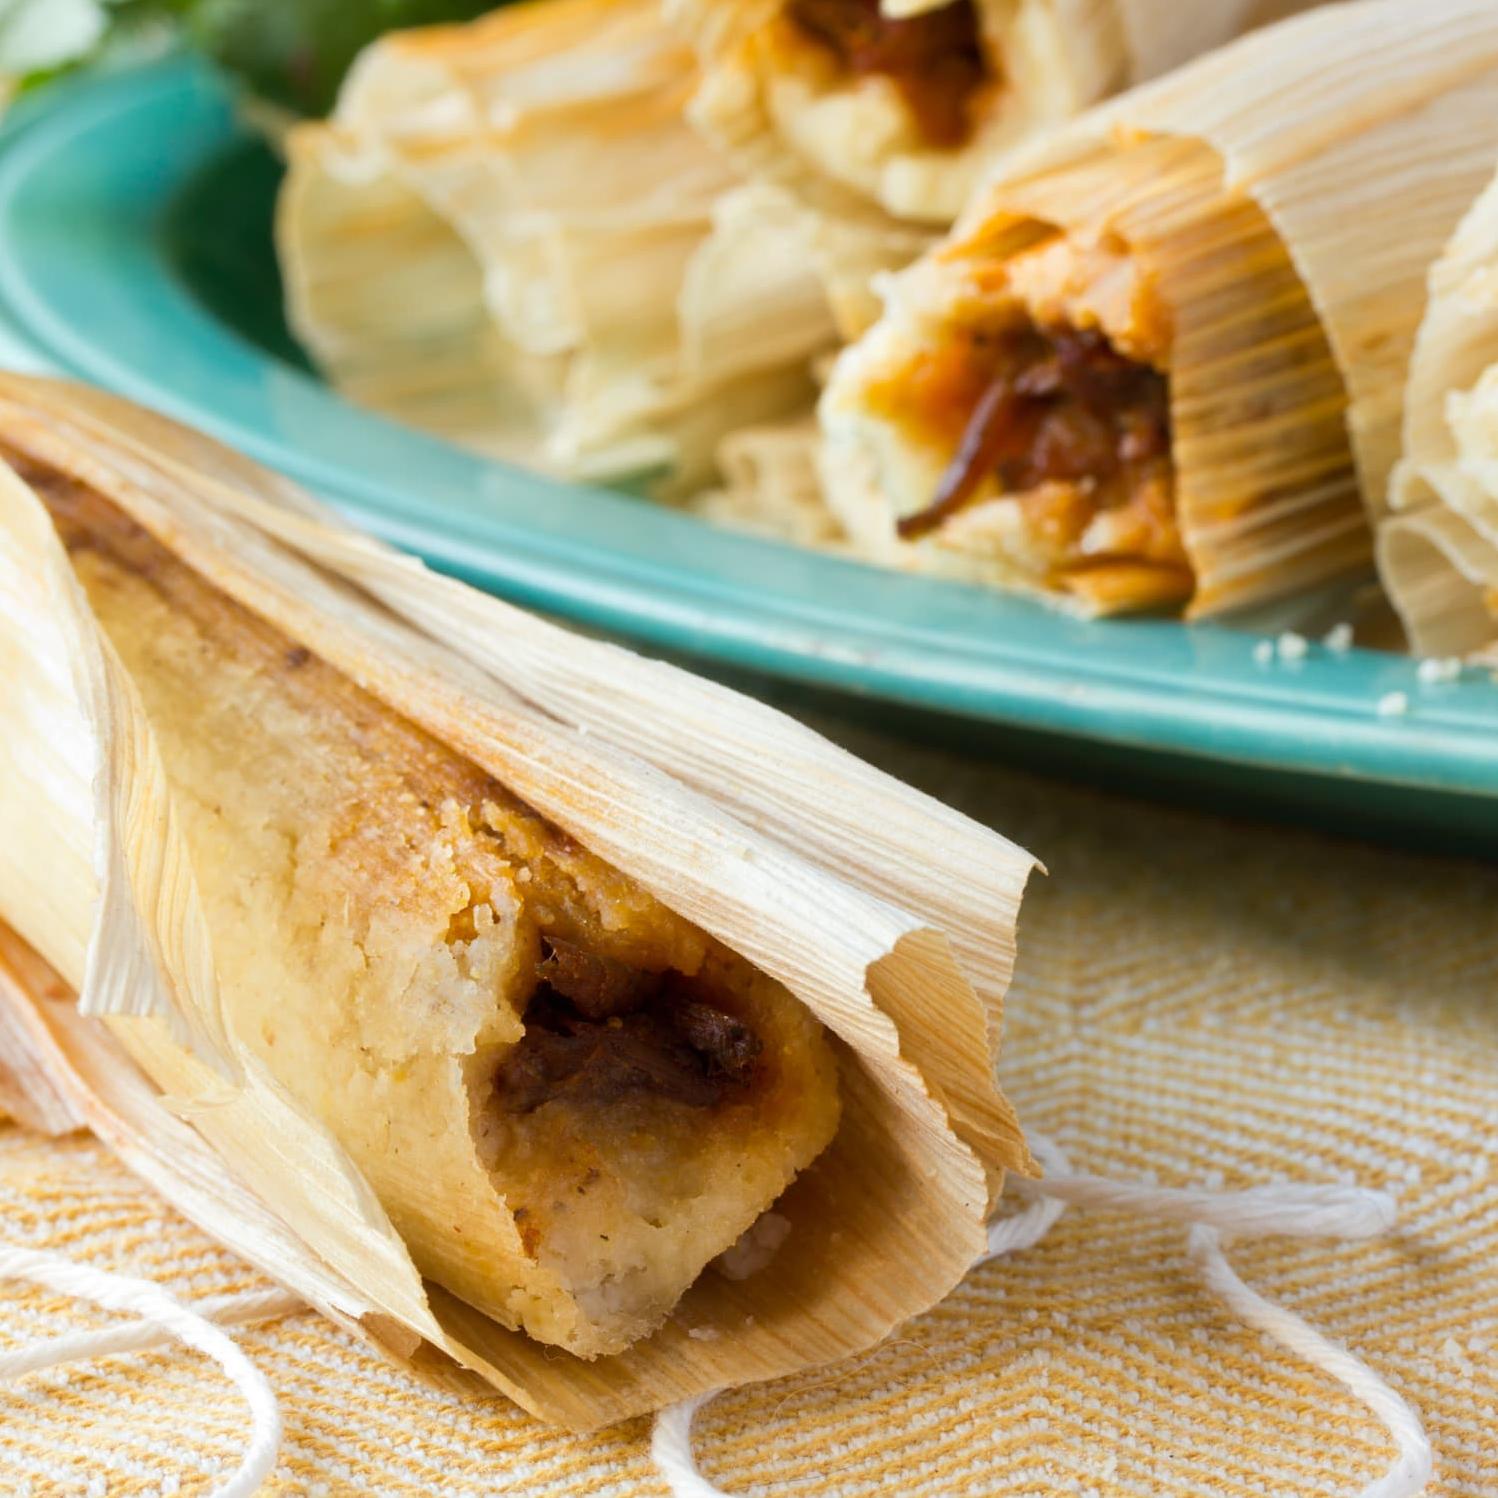  Satisfy your hunger with these mouth-watering tamales